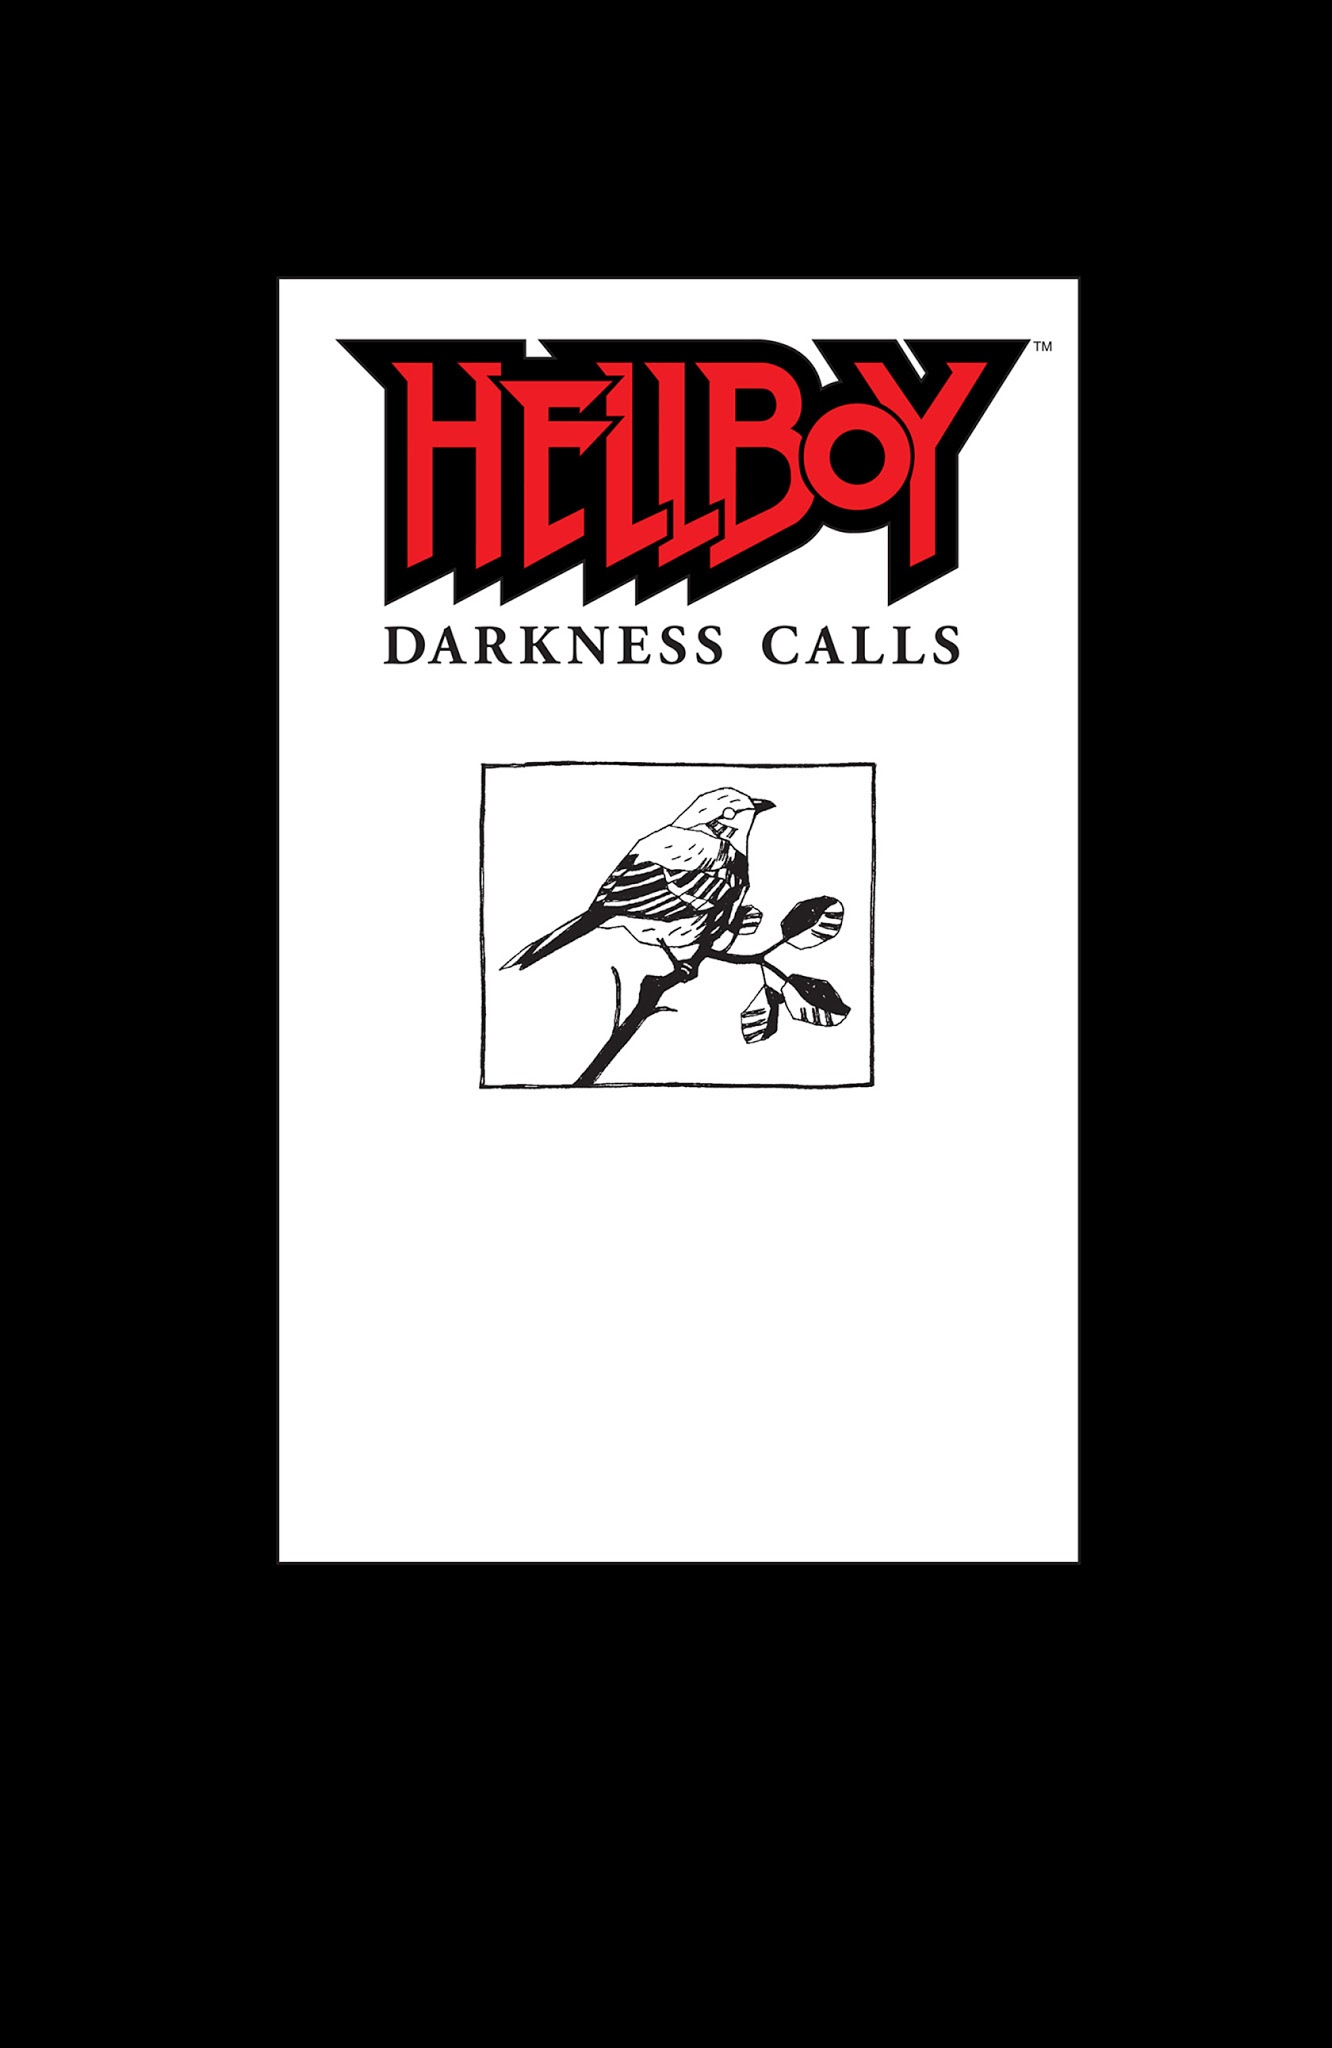 Read online Hellboy: Darkness Calls comic -  Issue # TPB - 2